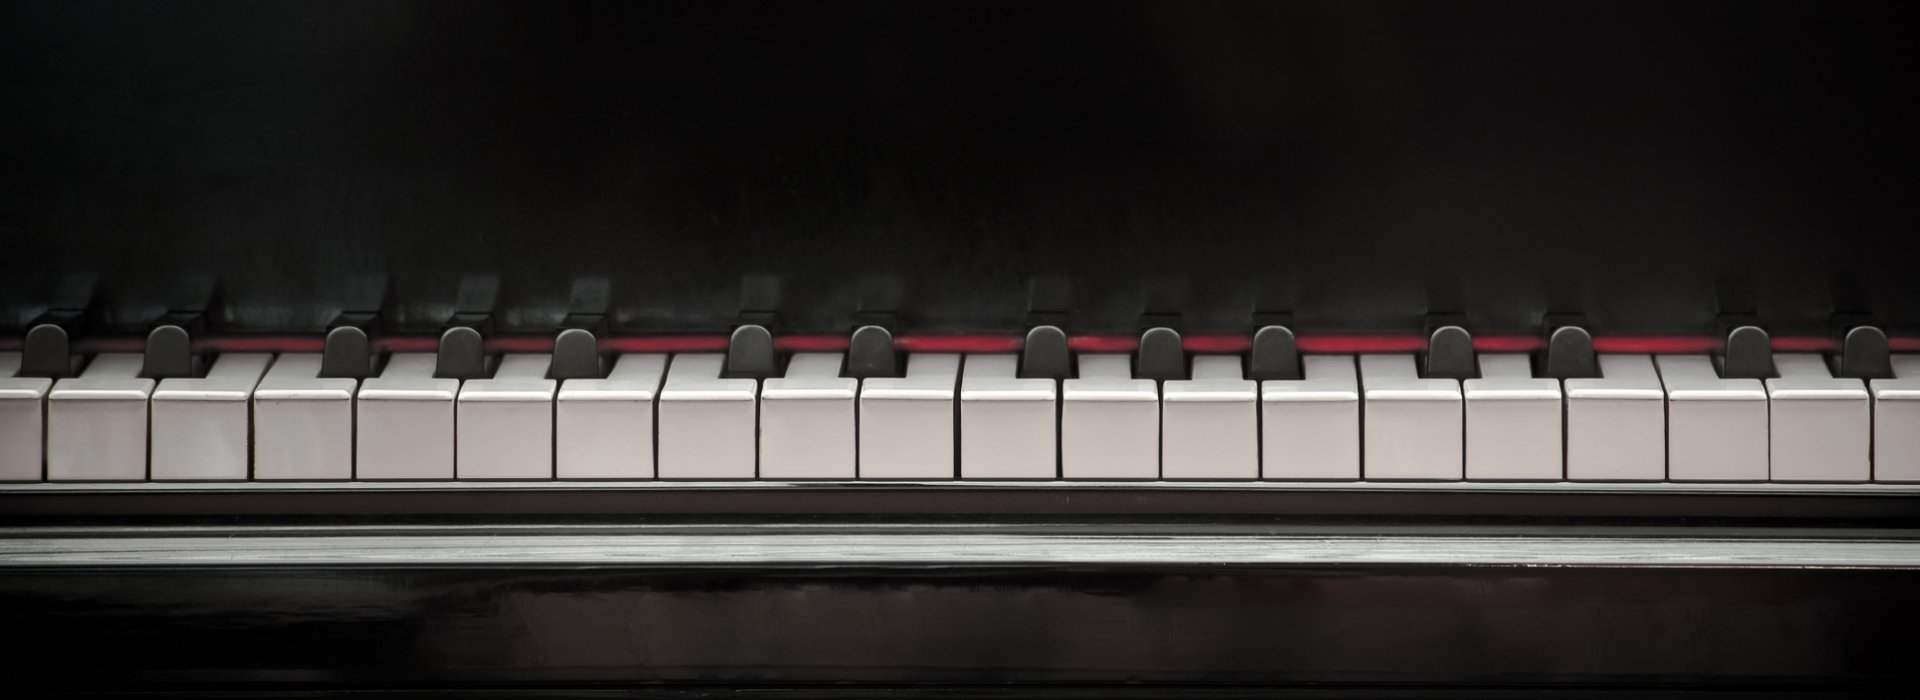 Piano keyboard on which Chopin composed music